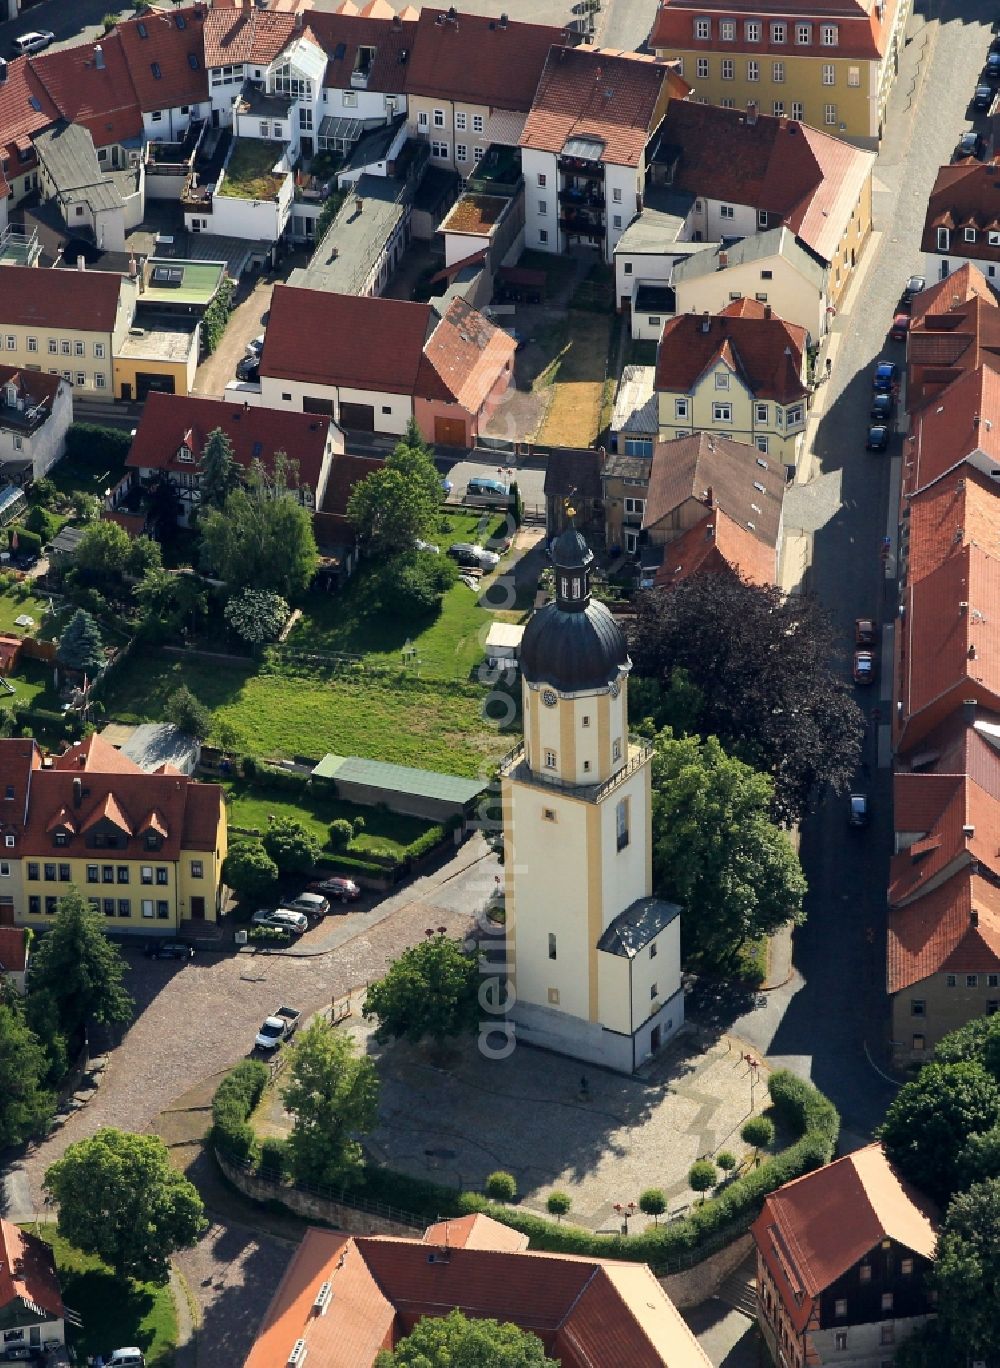 Aerial photograph Ohrdruf - On the Michaelis place in Ohrdruf in Thuringia is the tower of the former St. Machaeliskirche. The former city church was razed to the obtained tower at the end of WW2. From the tower, which have one of the landmarks of the city, the visitors a good view of the old town and the surrounding area. In the church of the famous church musician Johann Sebastian Bach had the play the organ from his brother learned